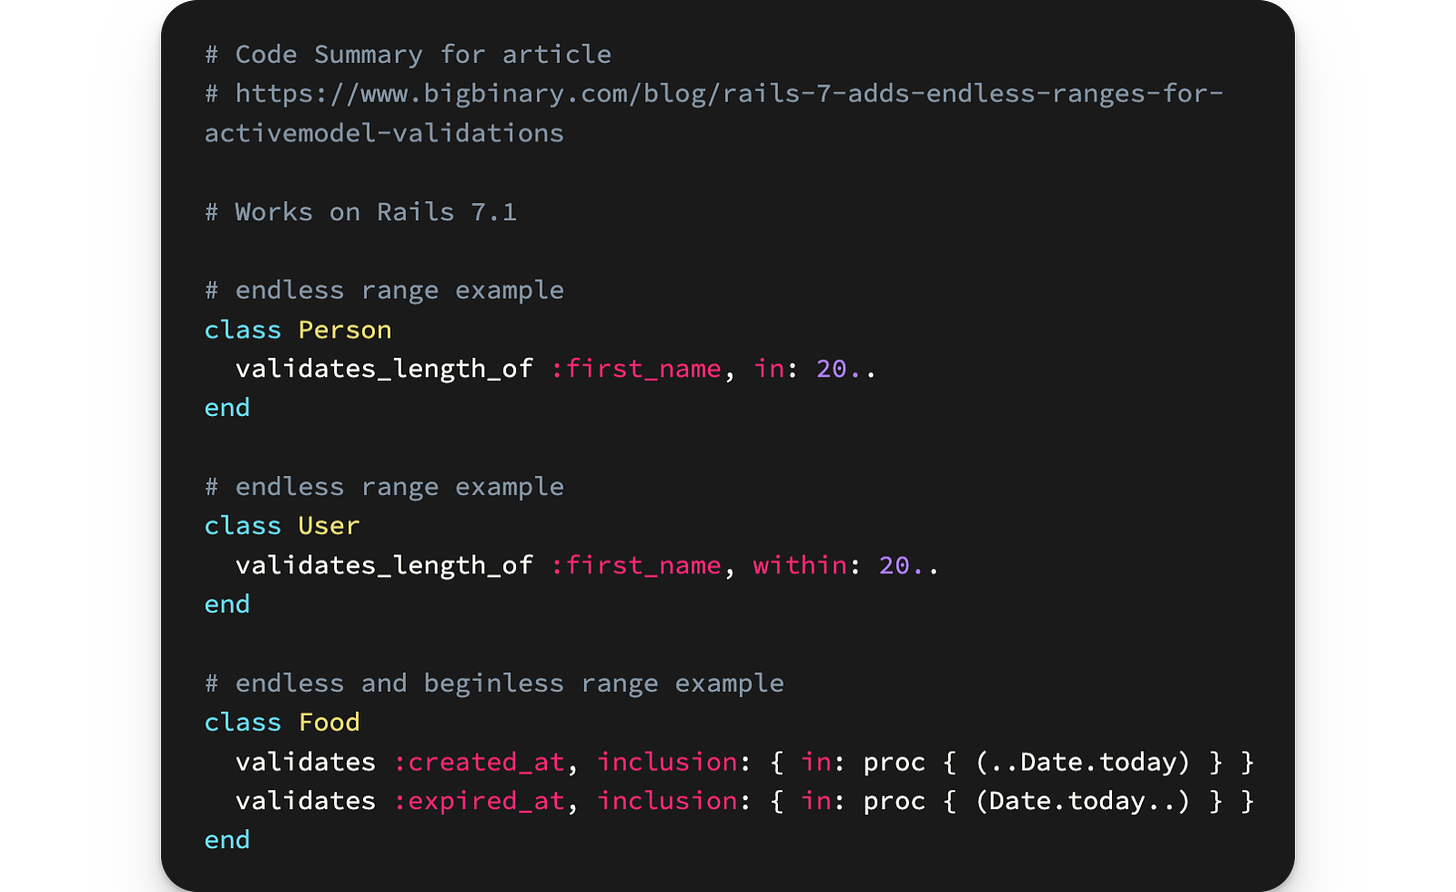 # Code Summary for article # https://www.bigbinary.com/blog/rails-7-adds-endless-ranges-for-activemodel-validations  # Works on Rails 7.1  # endless range example class Person   validates_length_of :first_name, in: 20.. end  # endless range example class User   validates_length_of :first_name, within: 20.. end  # endless and beginless range example class Food   validates :created_at, inclusion: { in: proc { (..Date.today) } }   validates :expired_at, inclusion: { in: proc { (Date.today..) } } end